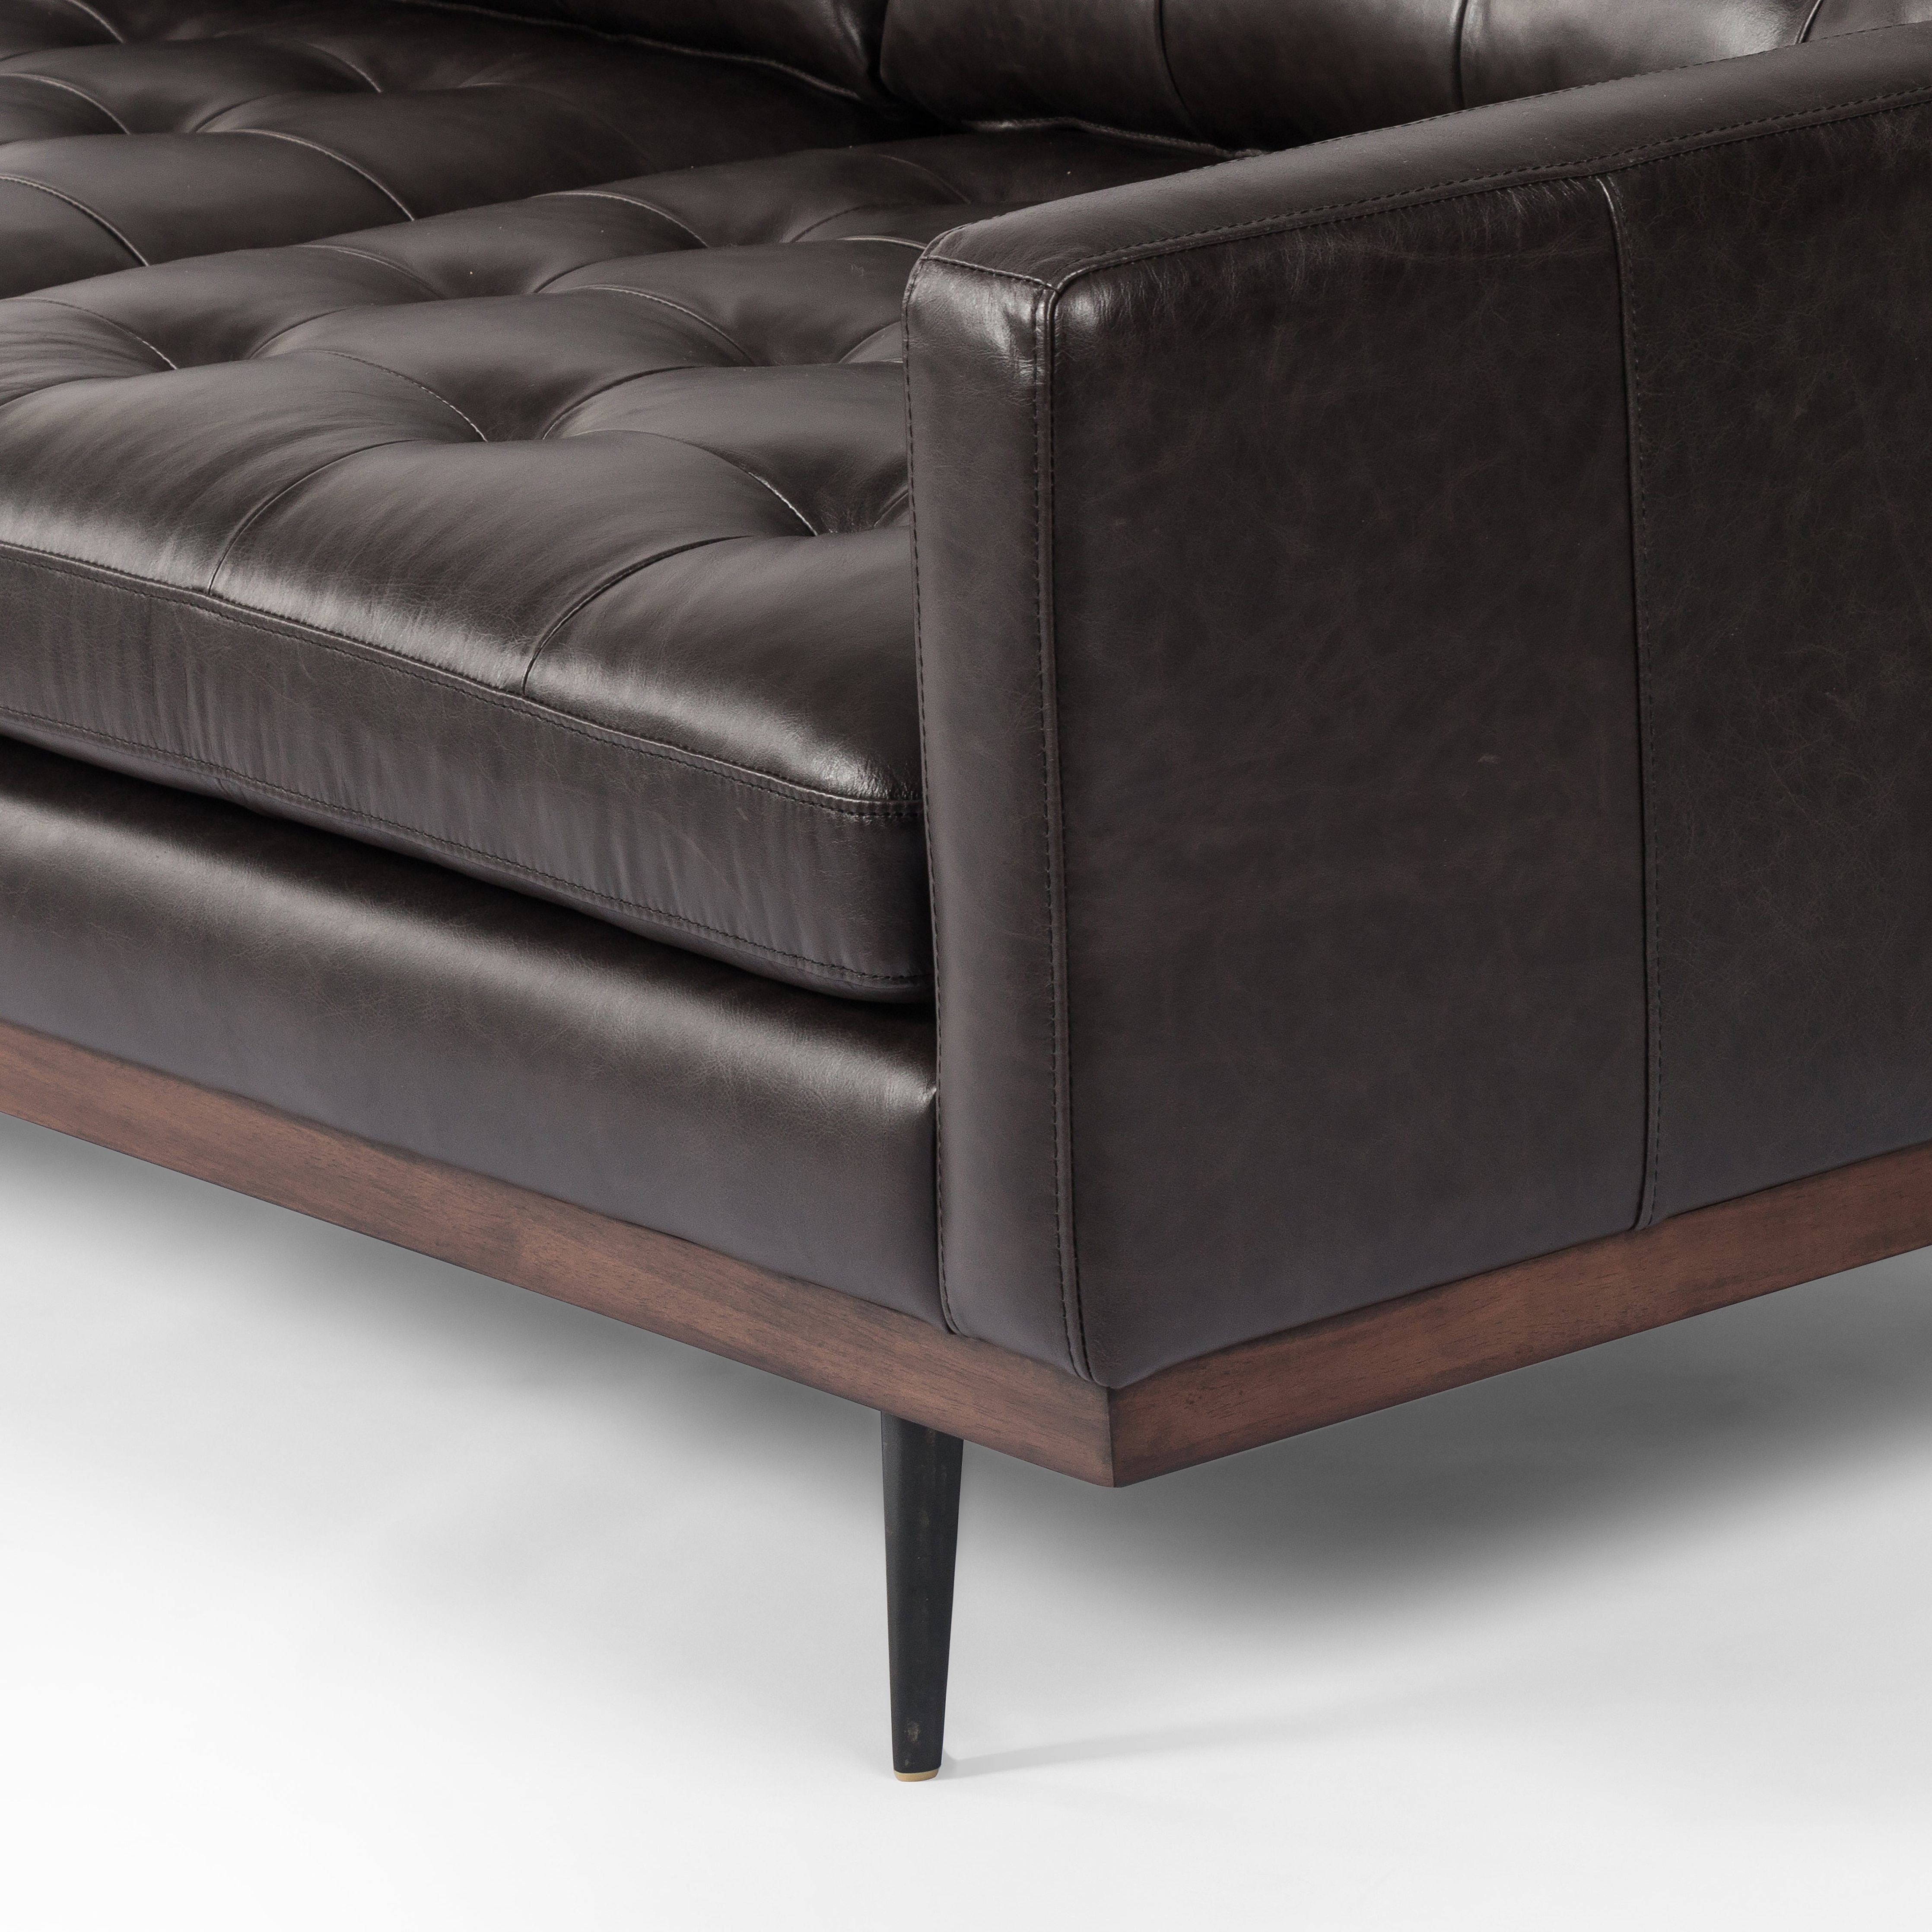 Low-leaning style with mid-century vibes. Upholstered in an exclusive subtly distressed black top-grain leather, with button tufting for texture and comfort. Finished with wrap-around framing and cone-tapered legs. Amethyst Home provides interior design, new construction, custom furniture, and area rugs in the Salt Lake City metro area.